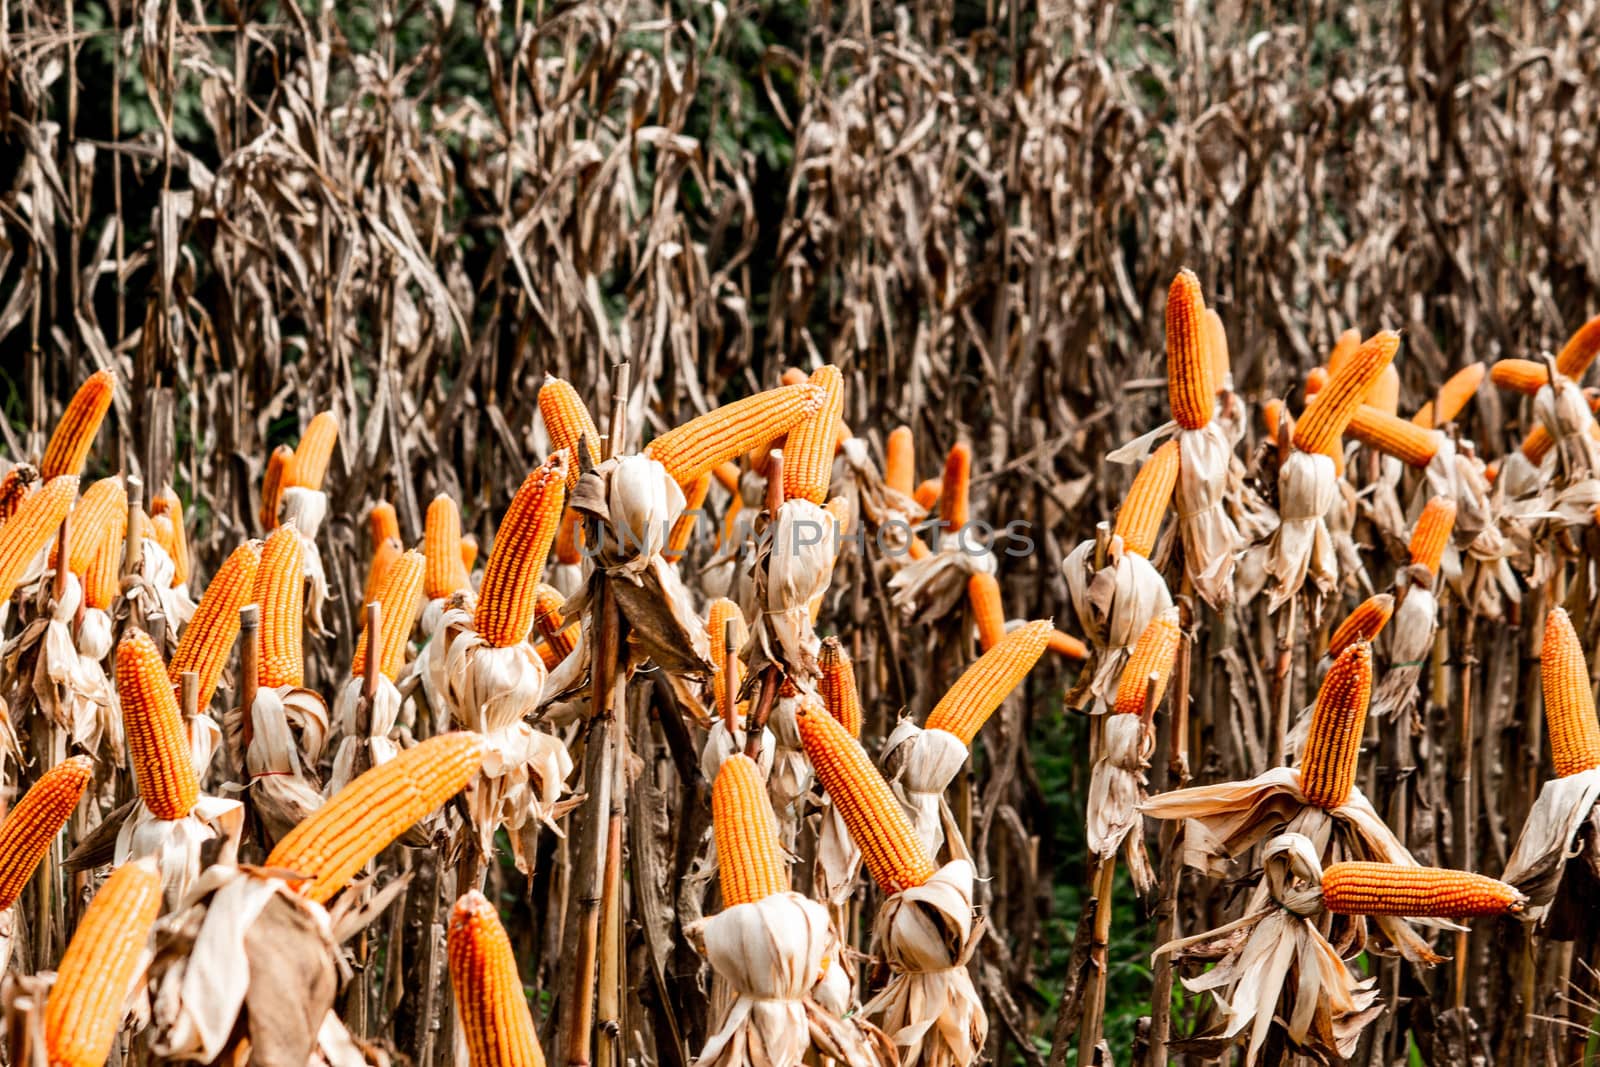 Dry corn cob with mature yellow corn growing ready for harvest in an agricultural field.